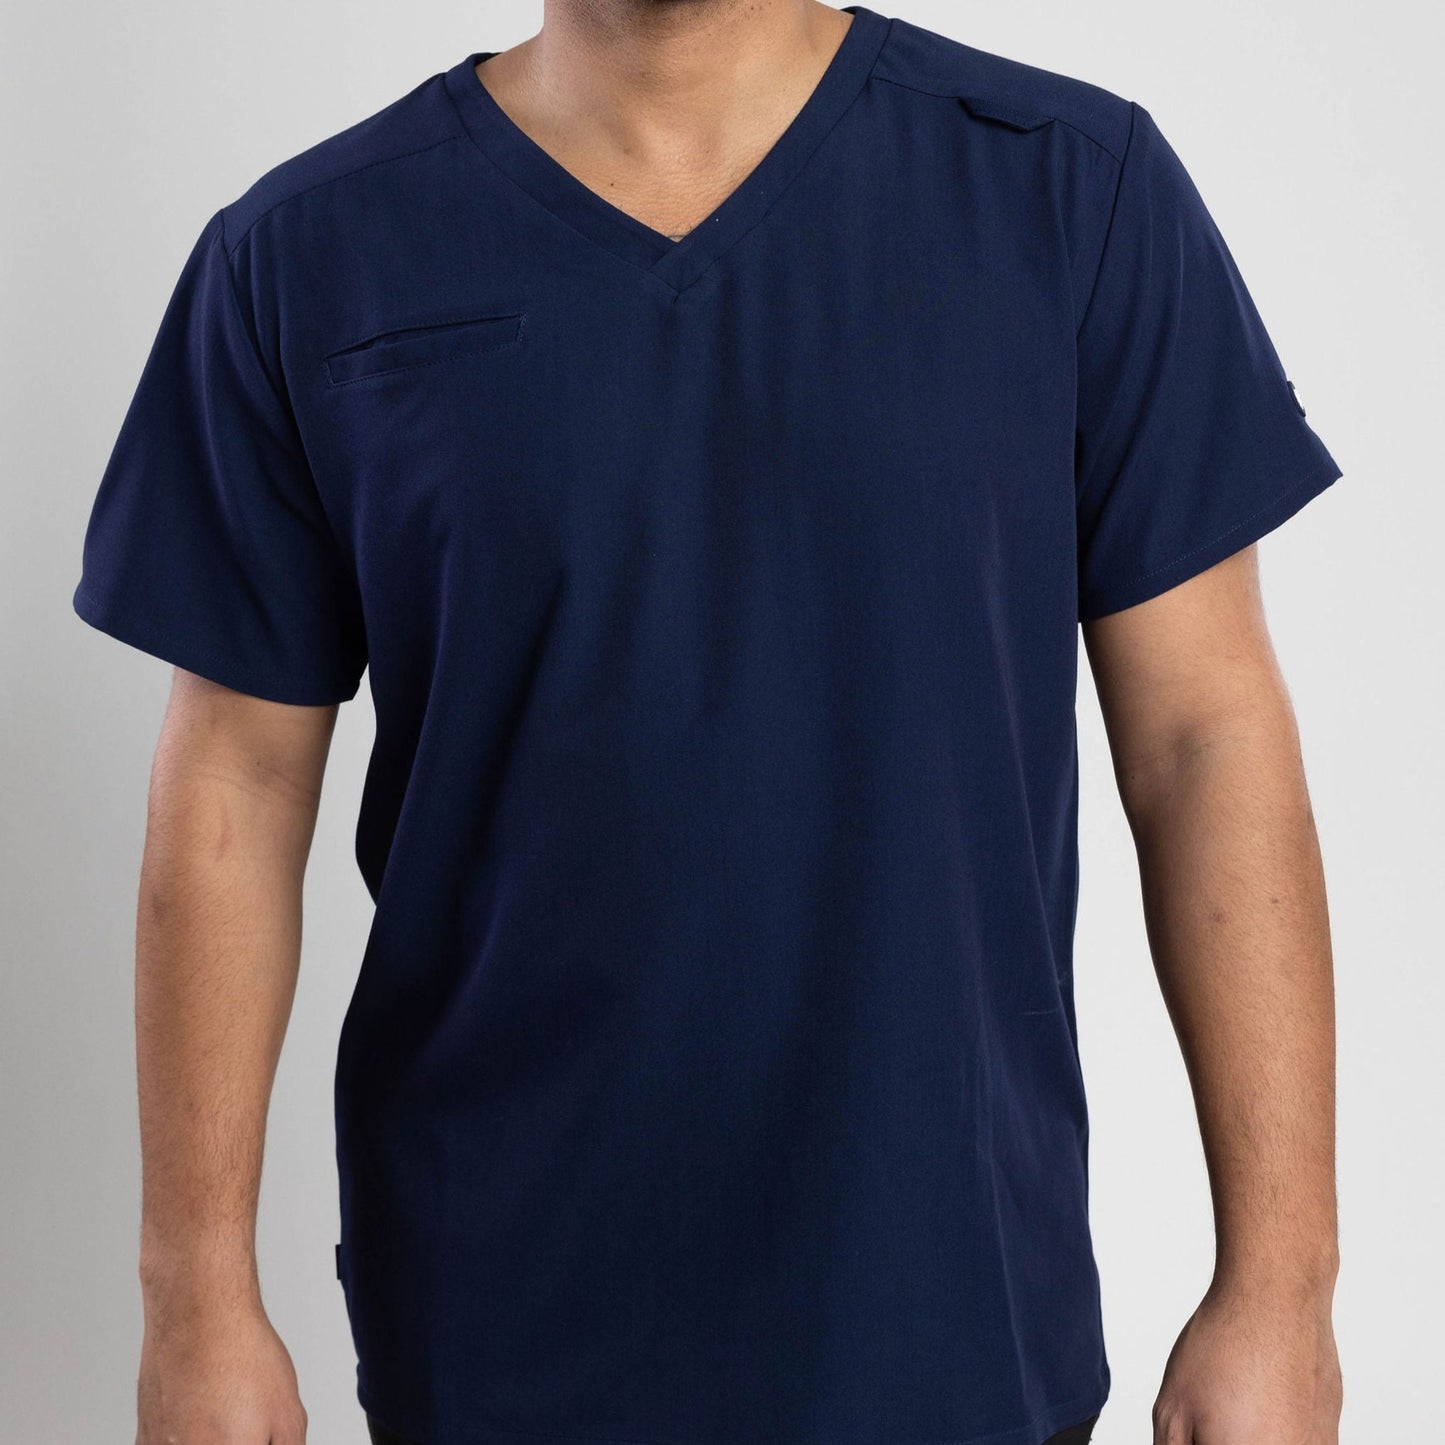 Apollo Scrubs - His - All Essential Tops for men, antimicrobial, V-Neck shirt